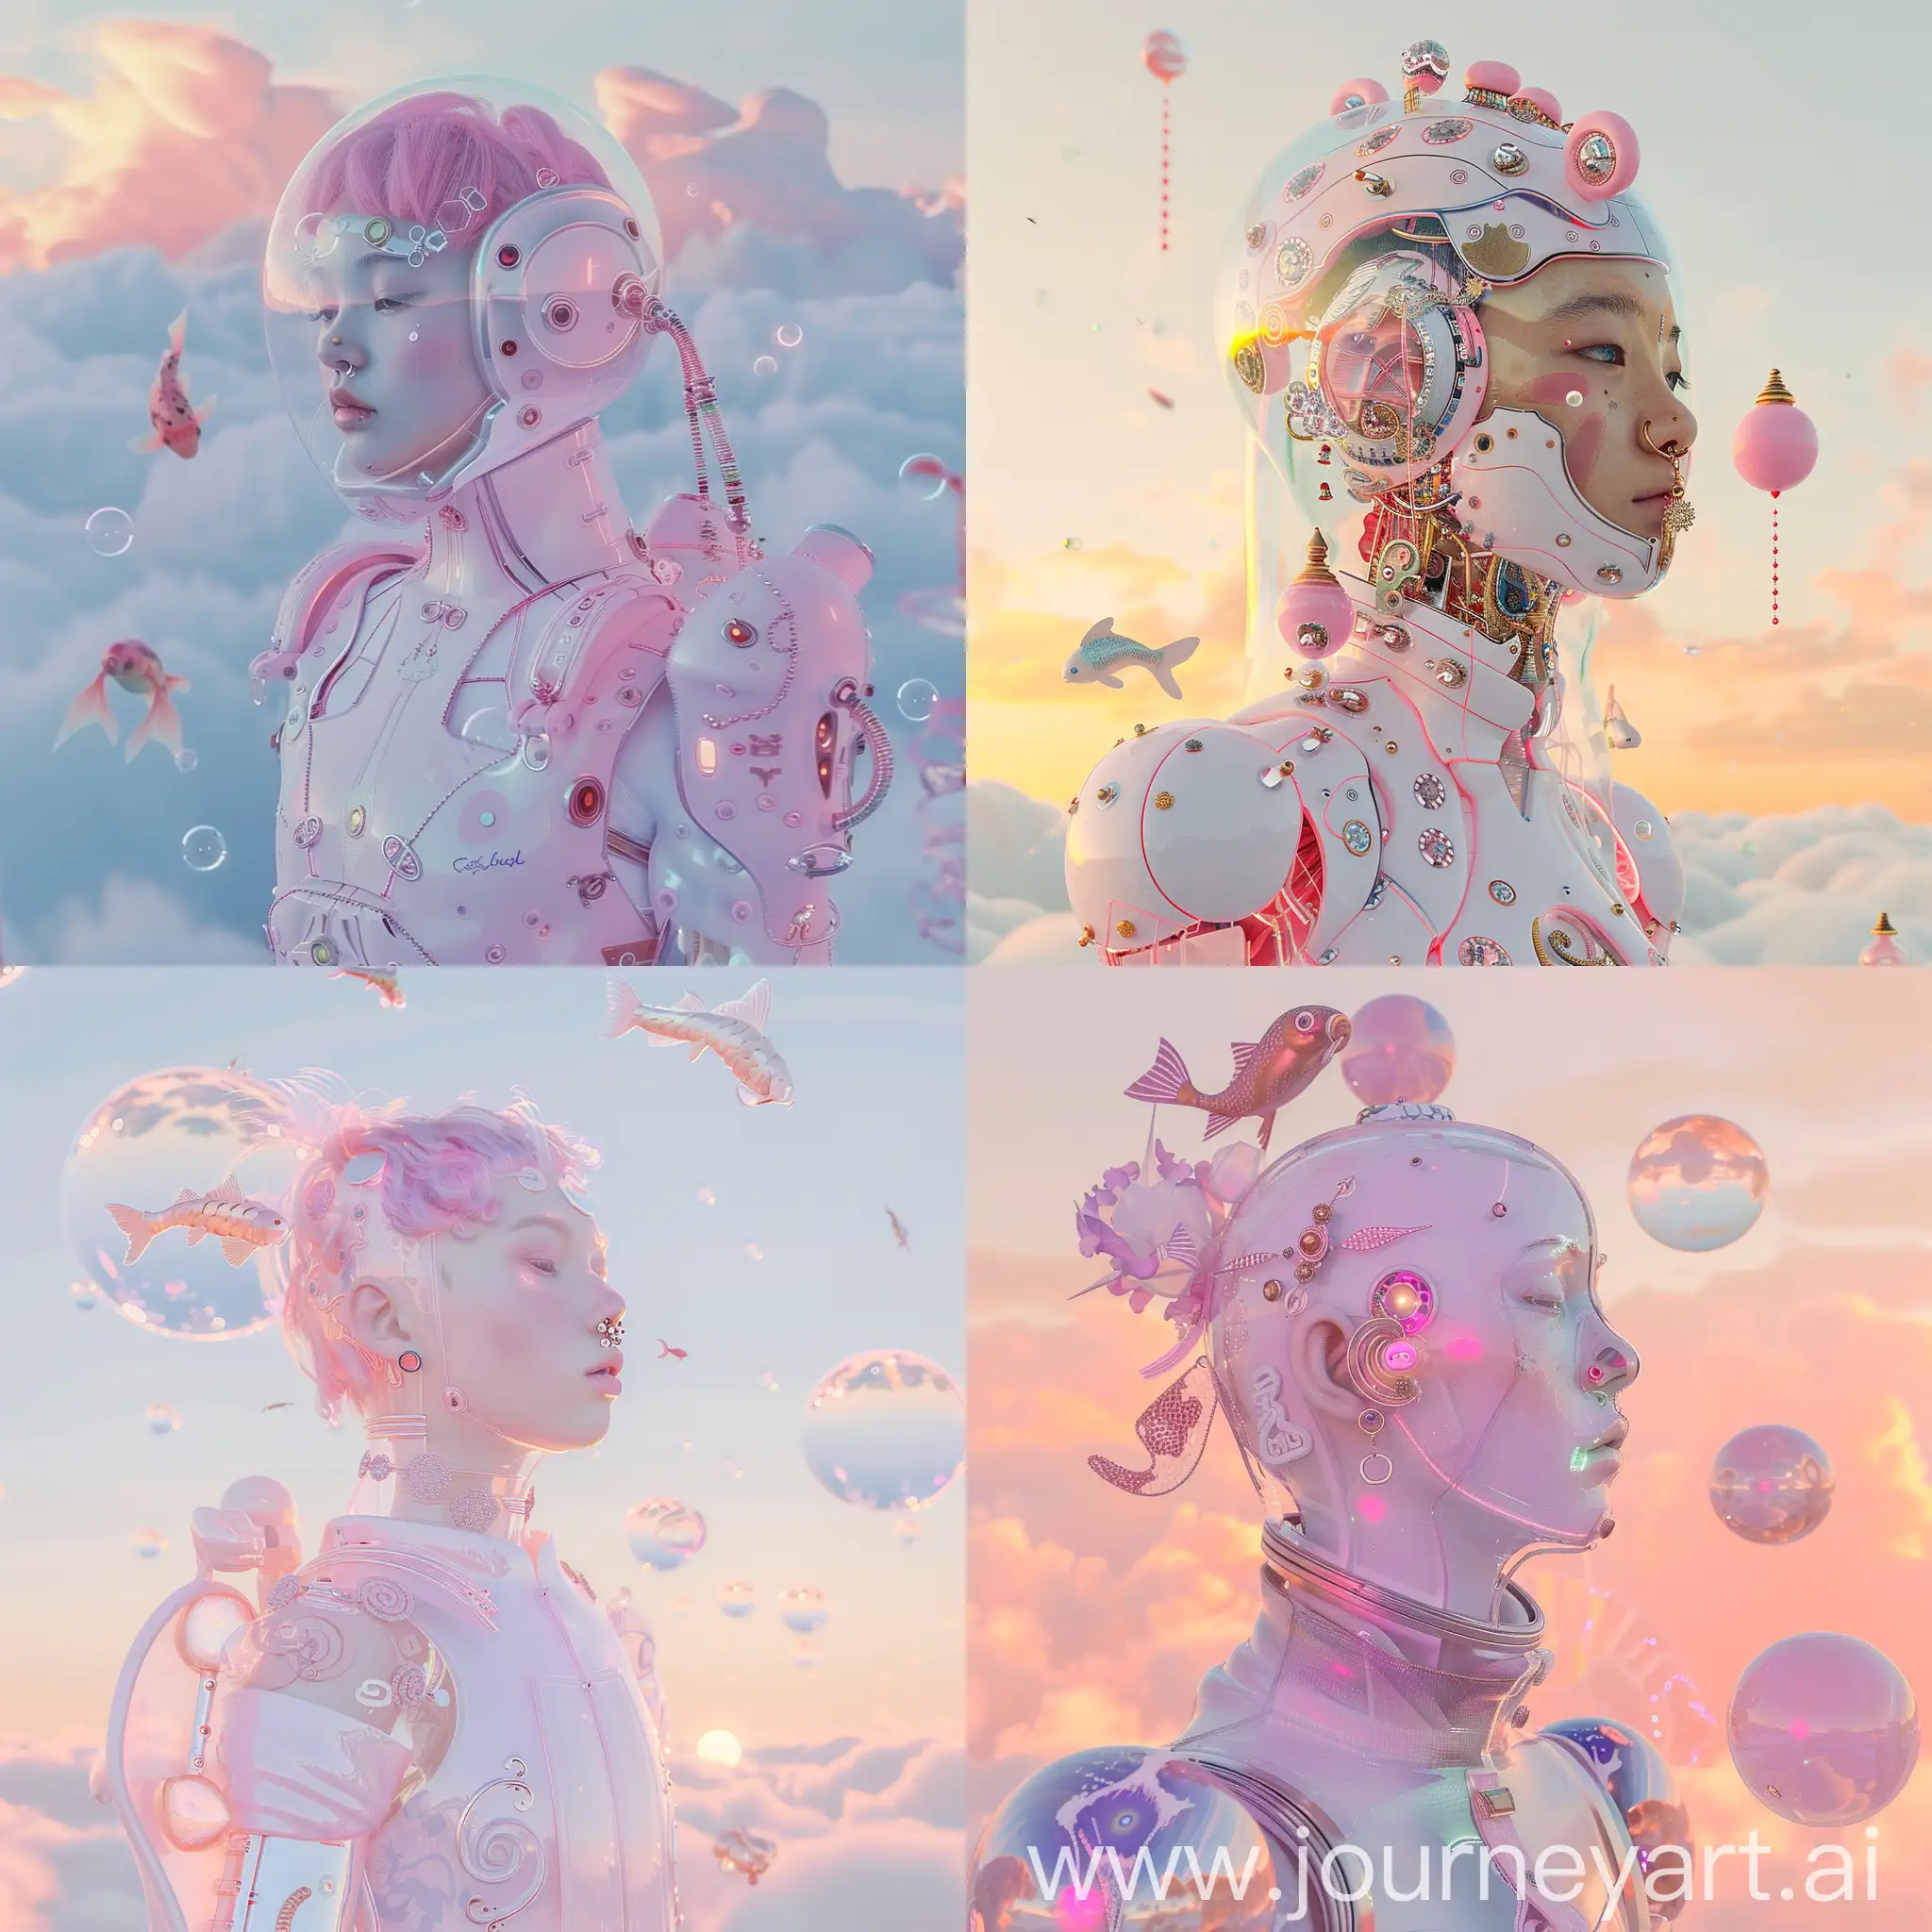 robot cyborg alien girl translucent white pink spacesuit pastel pink porcelain China pattern on body with pastel creative haircut and headdress at sunset  Angel wings yoga Burning Man yoga poses above the clouds balloons koi fish bubbles floating buddhas creative nose rings and earrings 